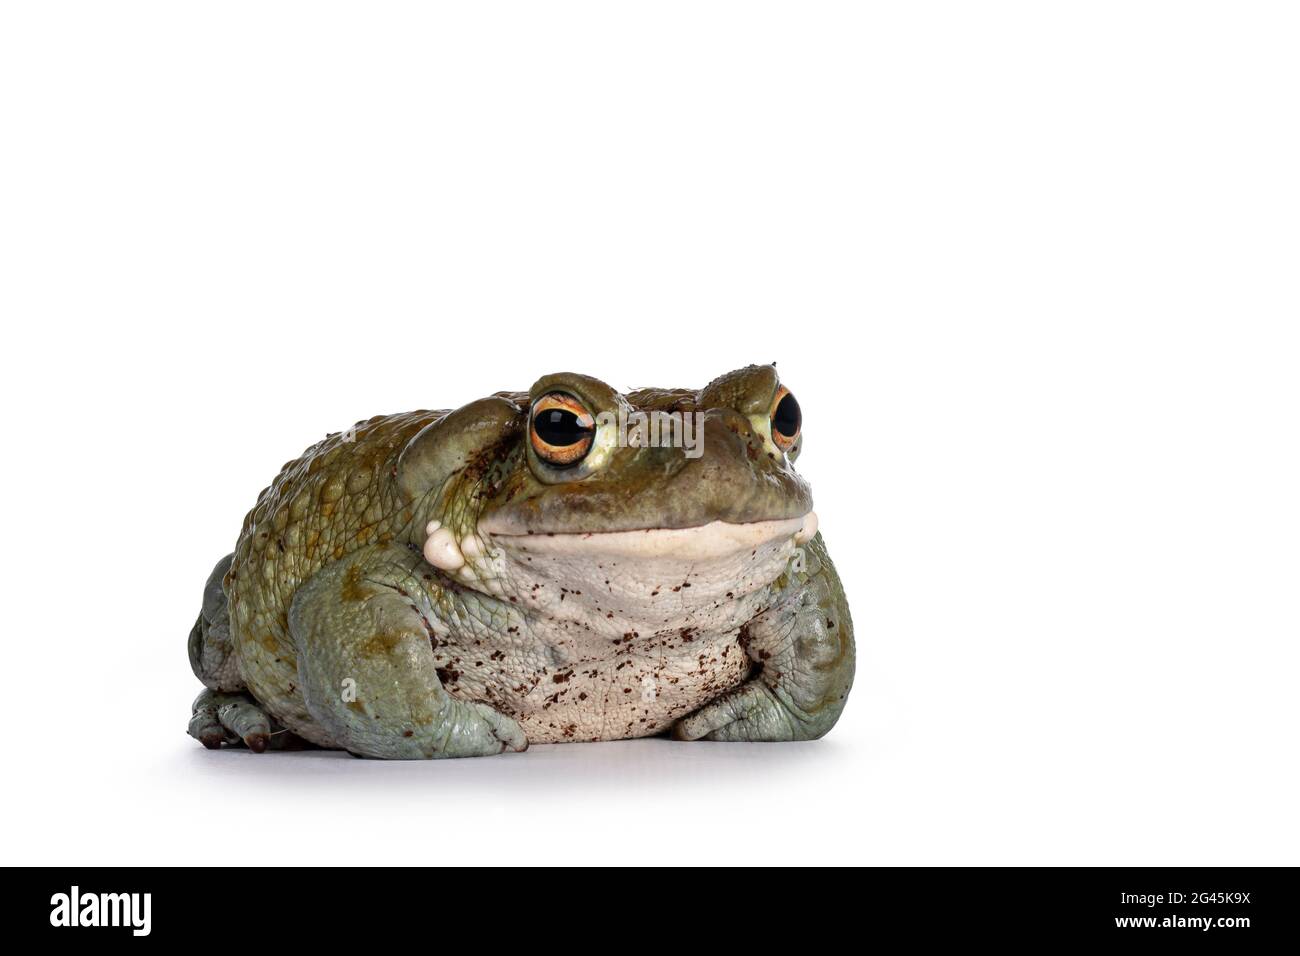 Bufo Alvarius aka Colorado River Toad, sitting facing front. Looking ahead with golden eyes. Isolated on white background. Stock Photo